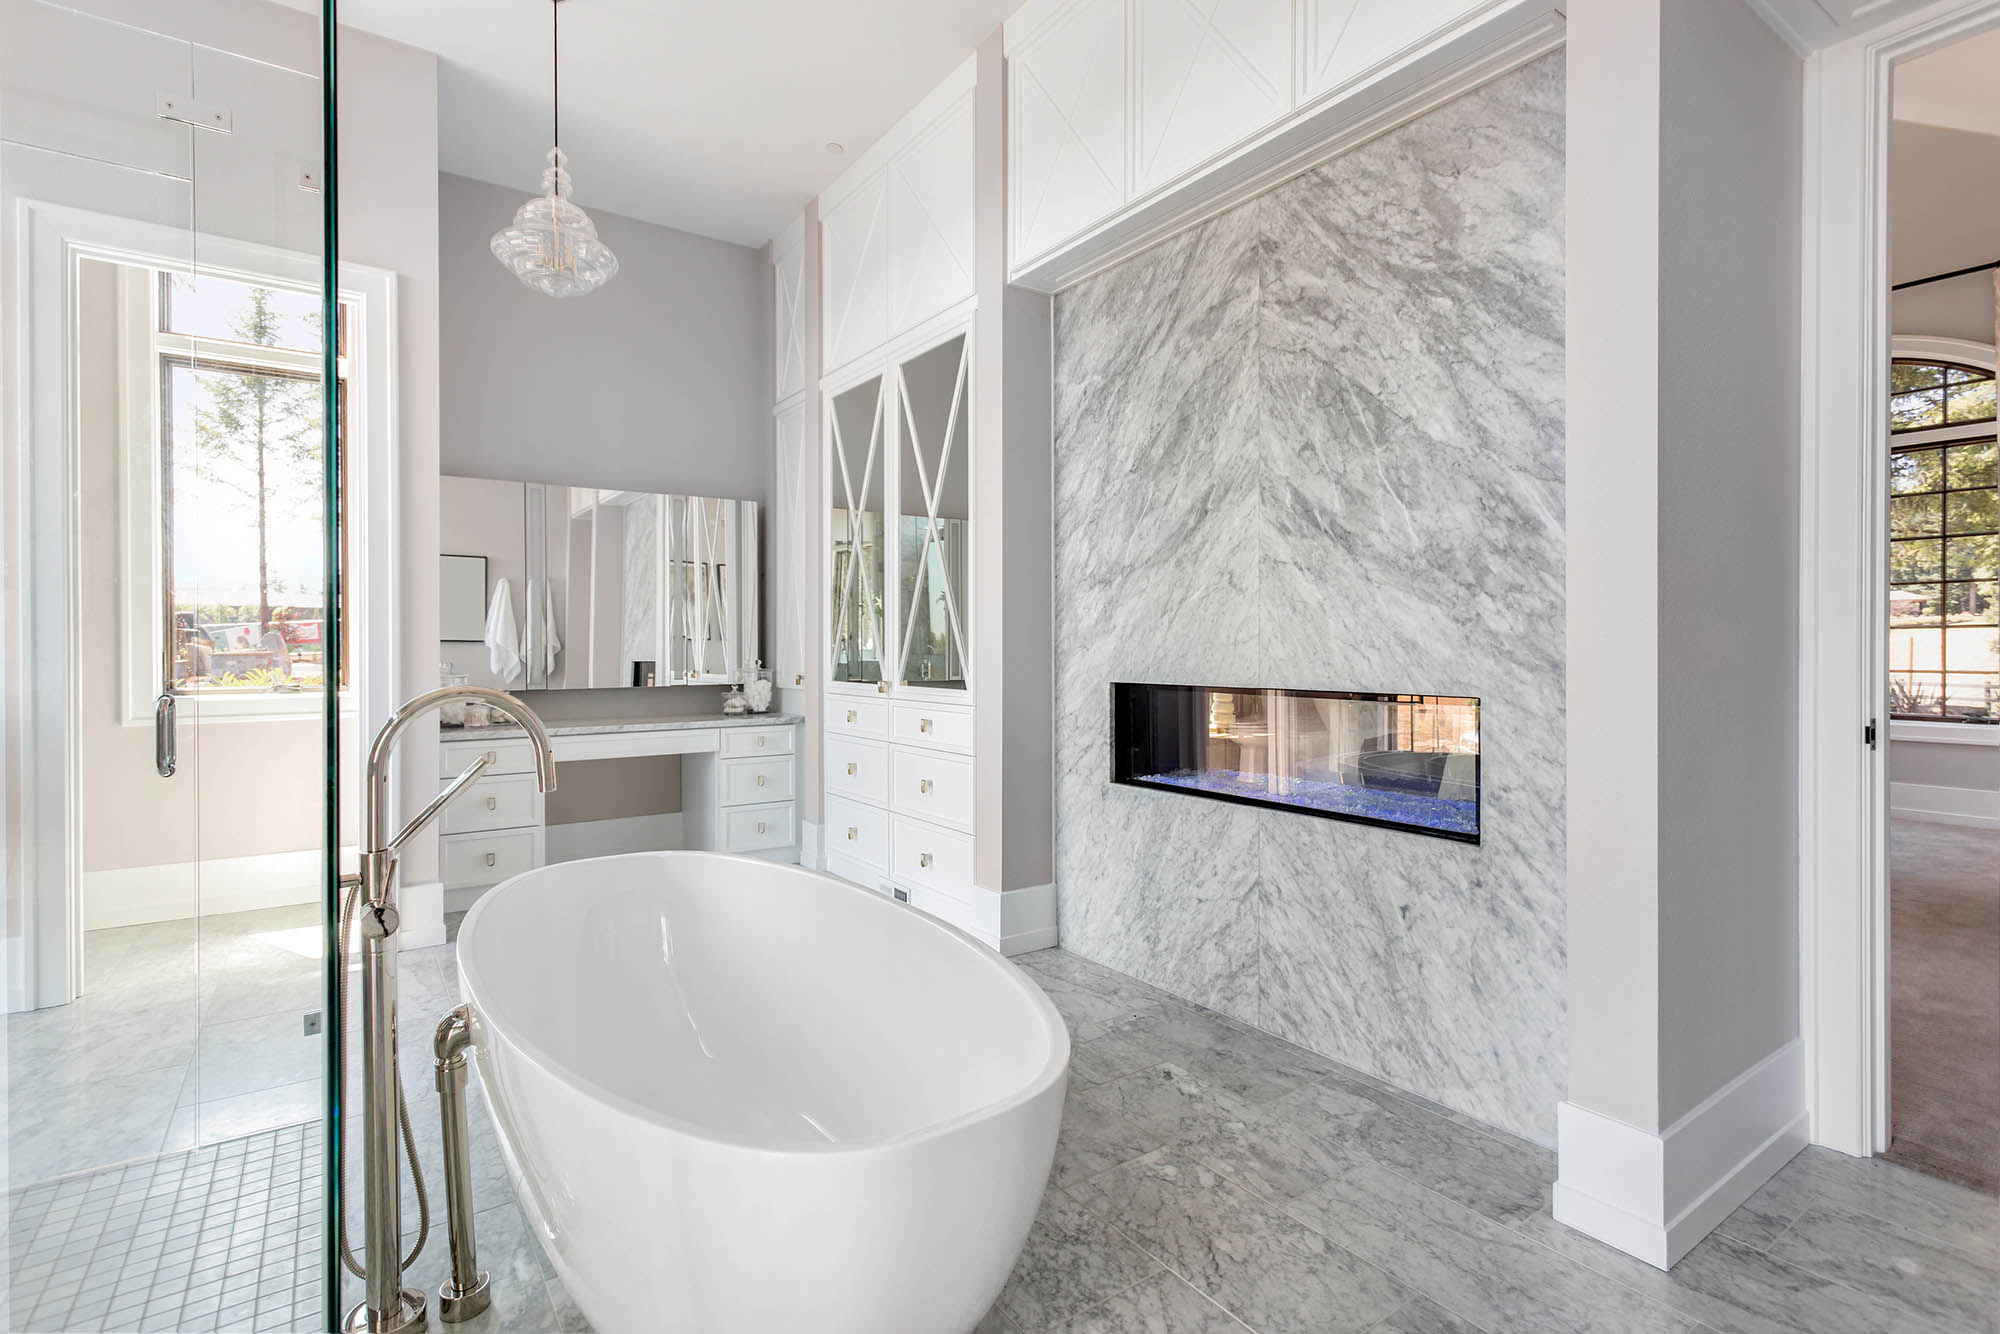 New bathtub remodel with built-in fireplace.